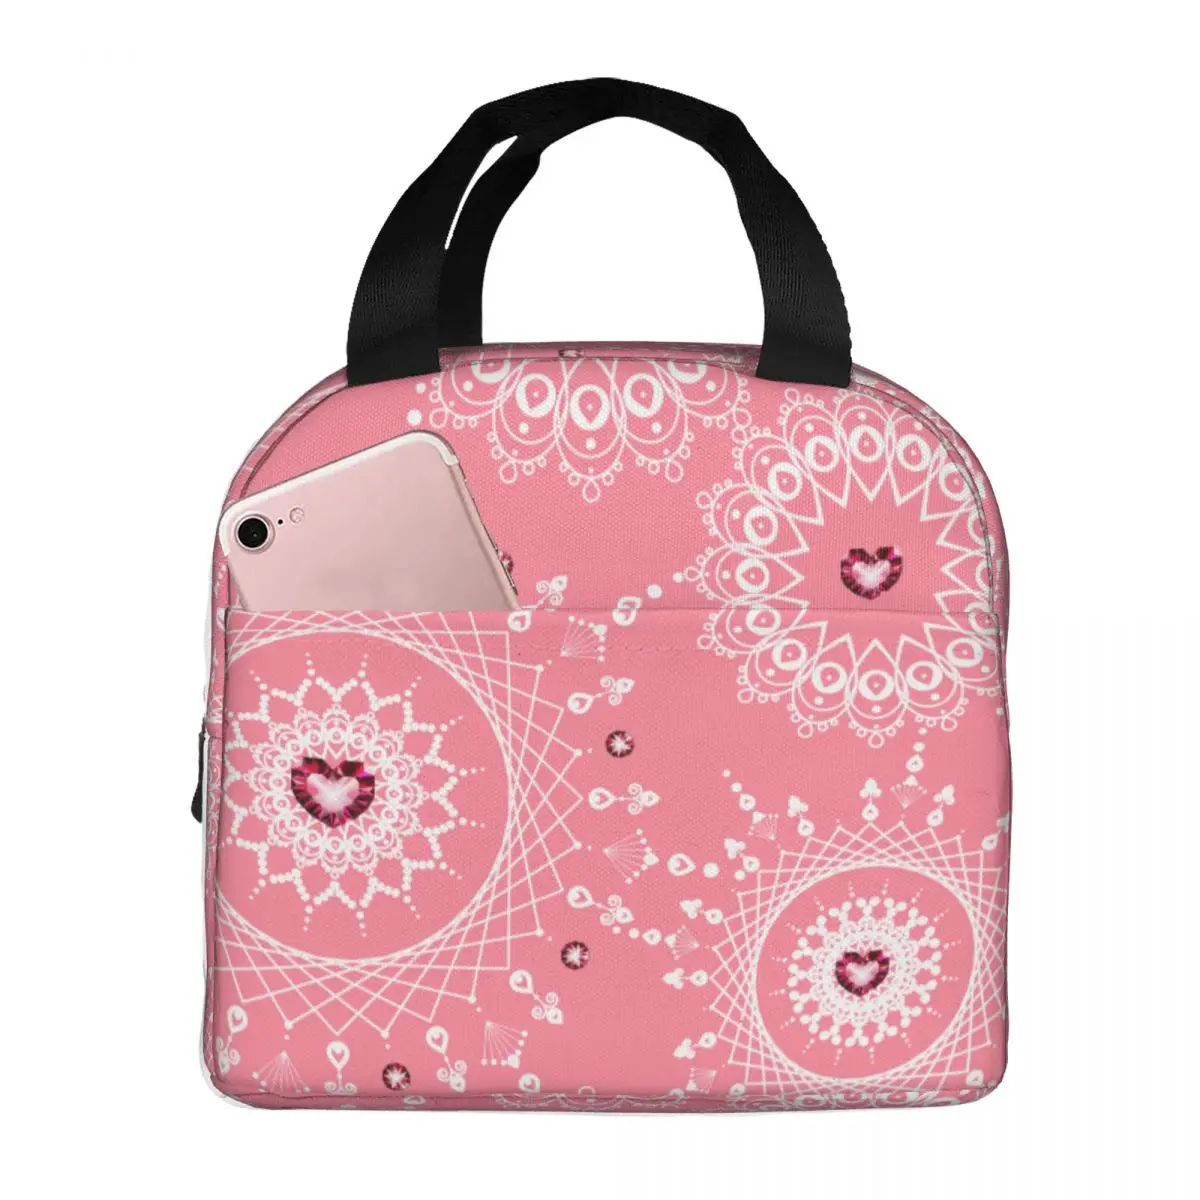 Mandala Lunch Bags Portable Insulated Oxford Cooler Thermal Cold Food Picnic Travel Tote for Women Girl